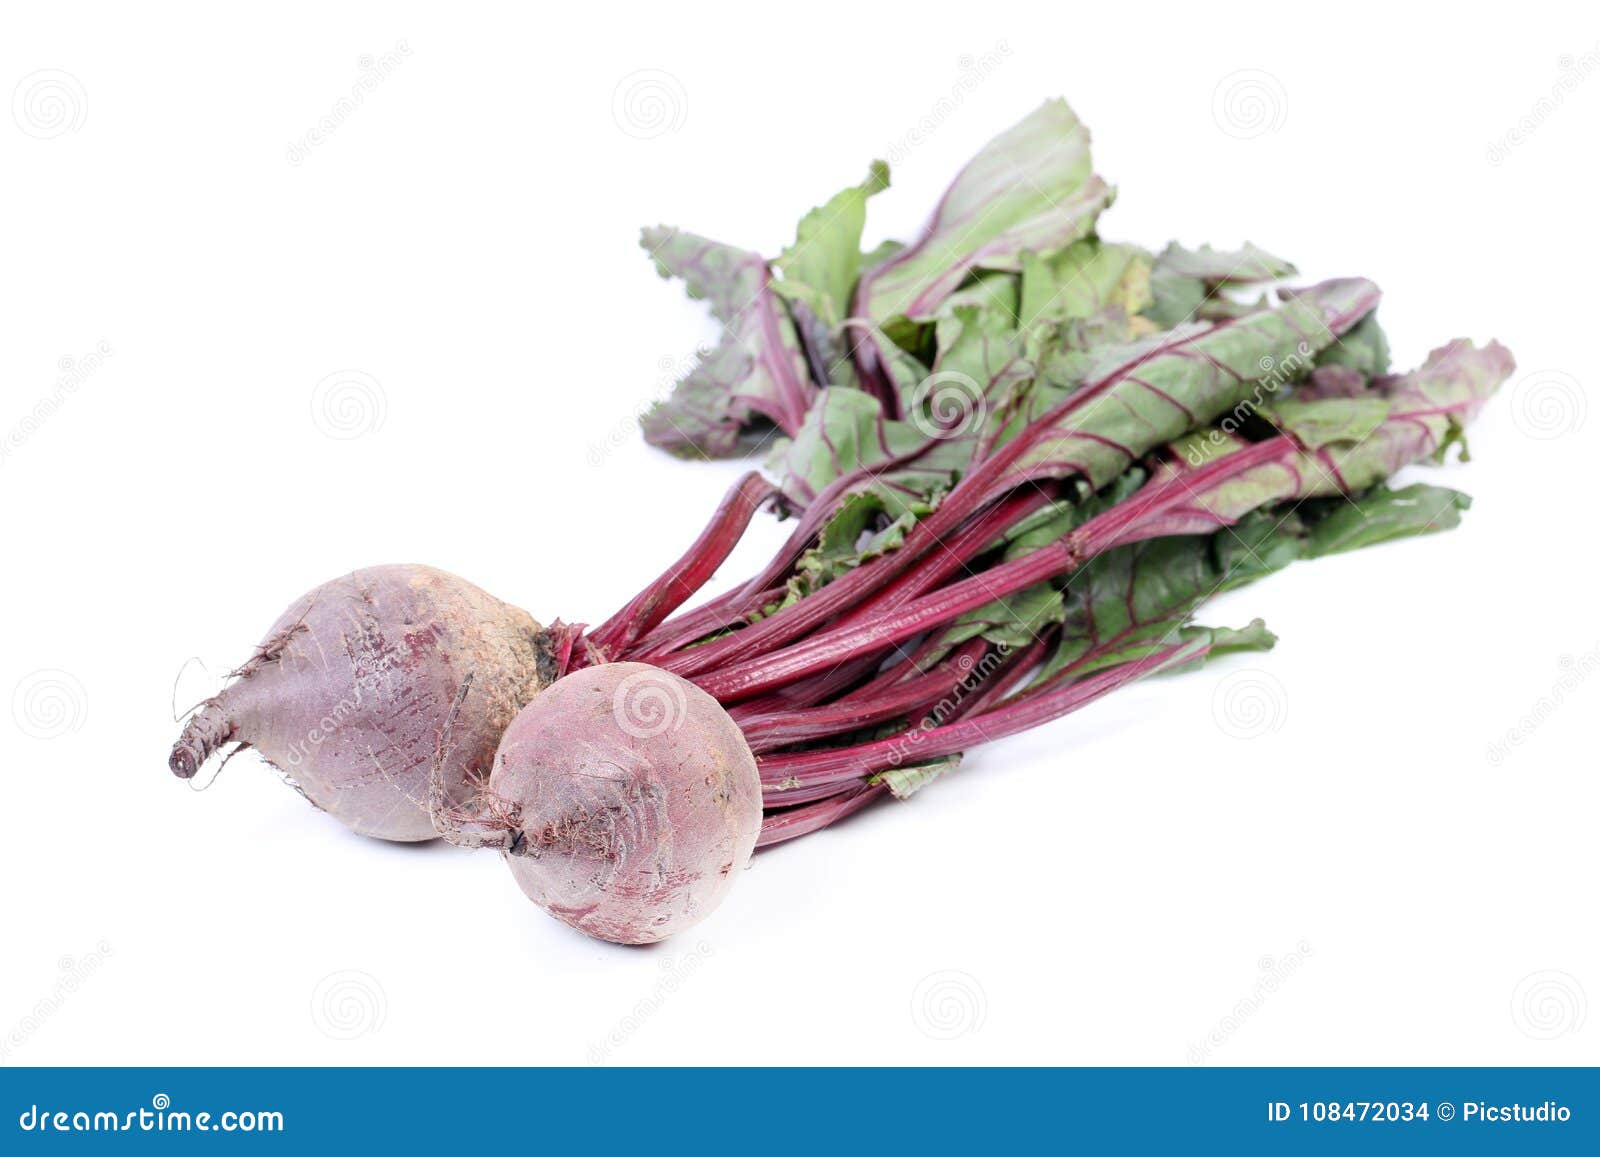 Beat root Image of vegetable, colored - 108472034